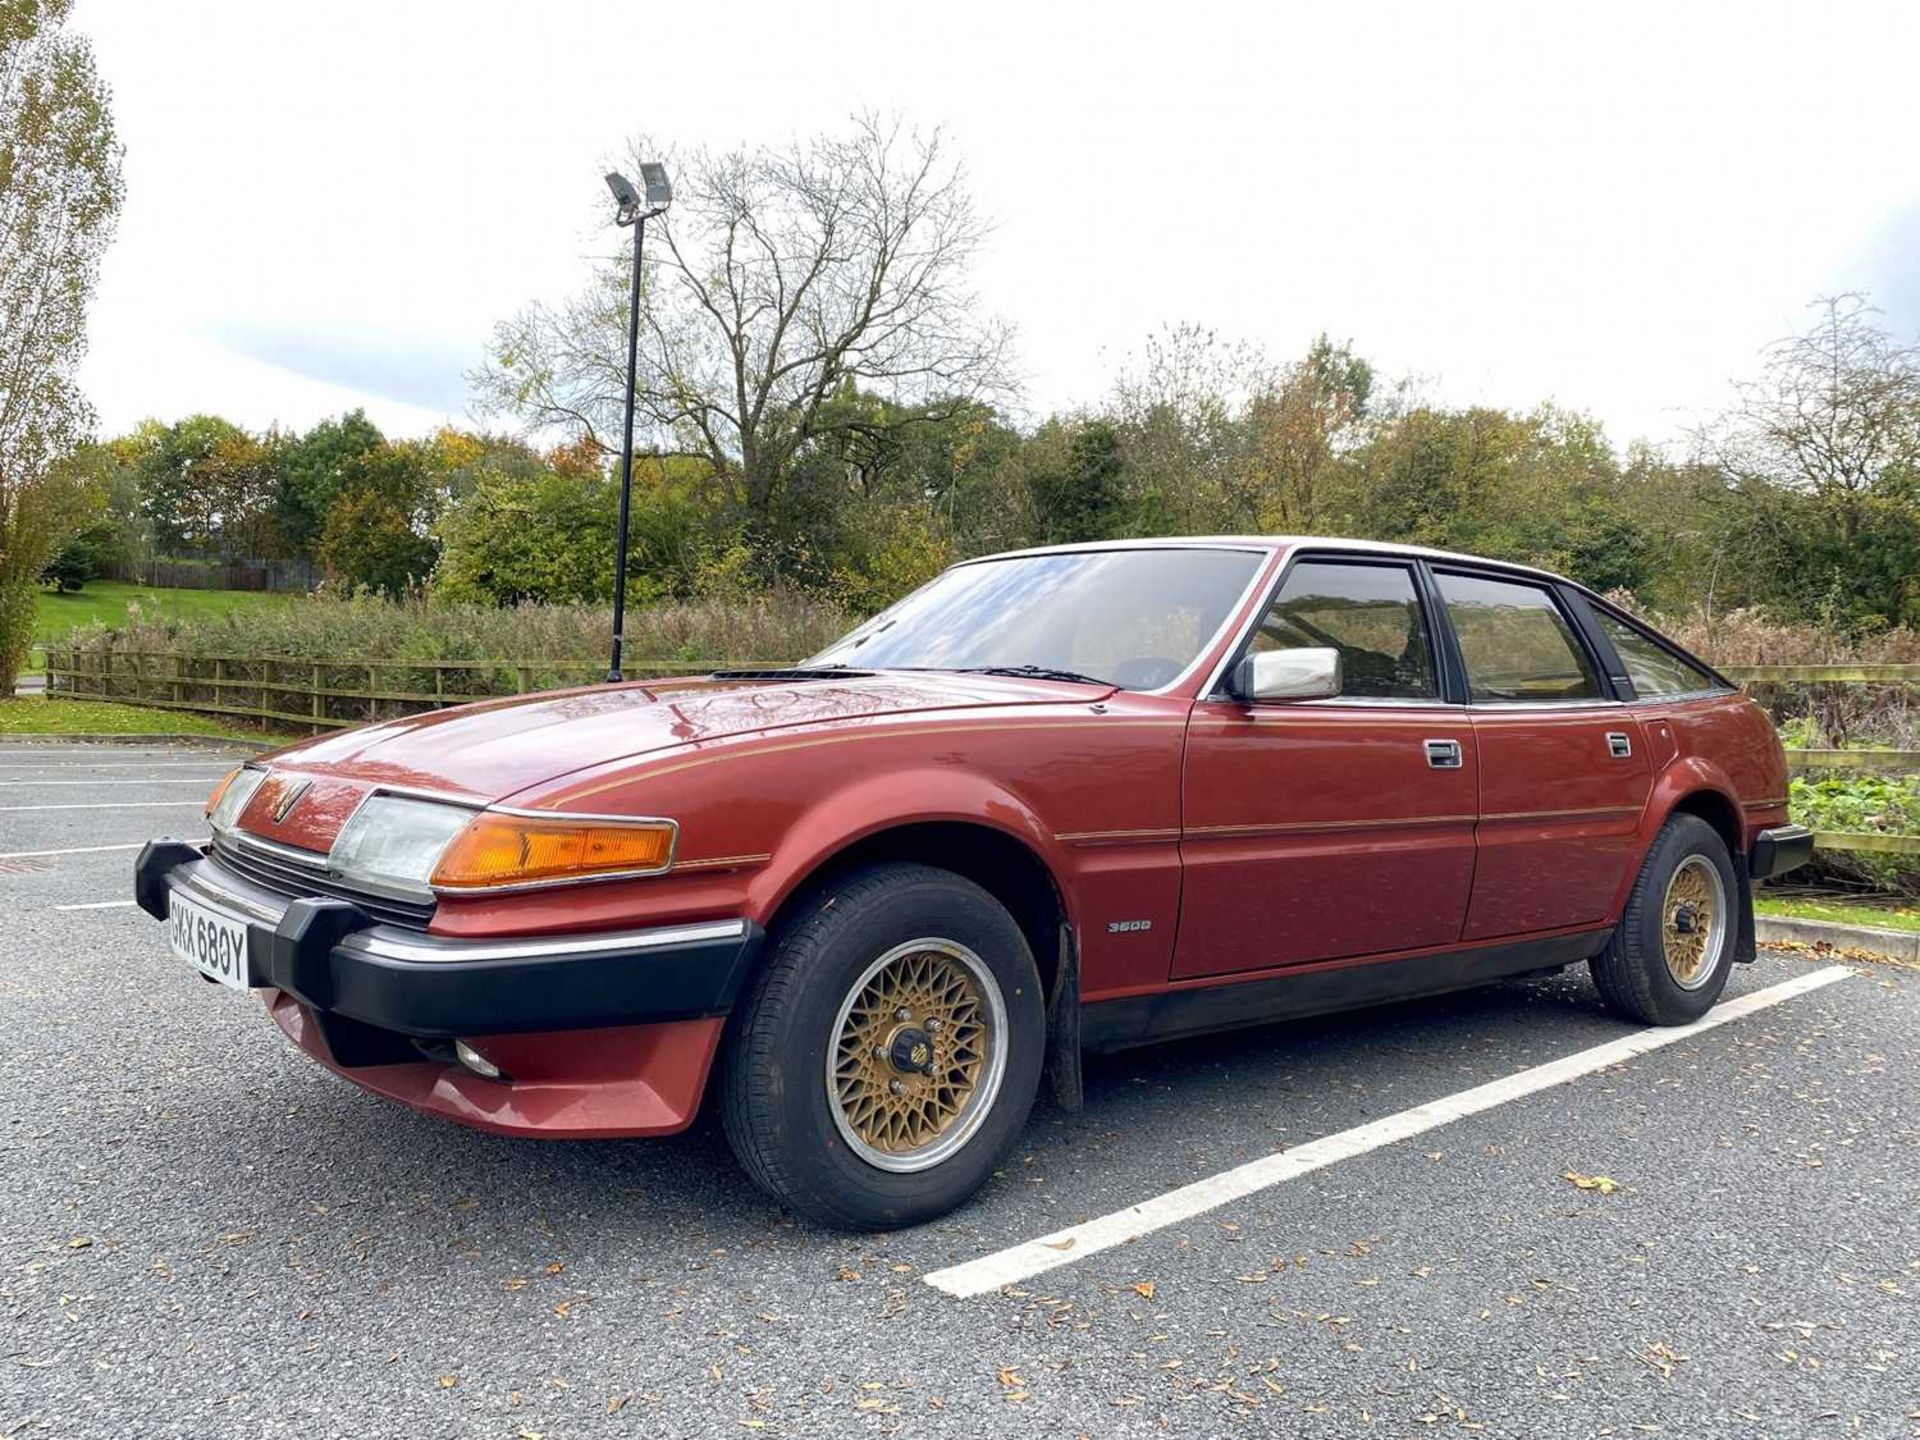 1982 Rover SD1 3500 SE Only 29,000 miles - Image 10 of 100